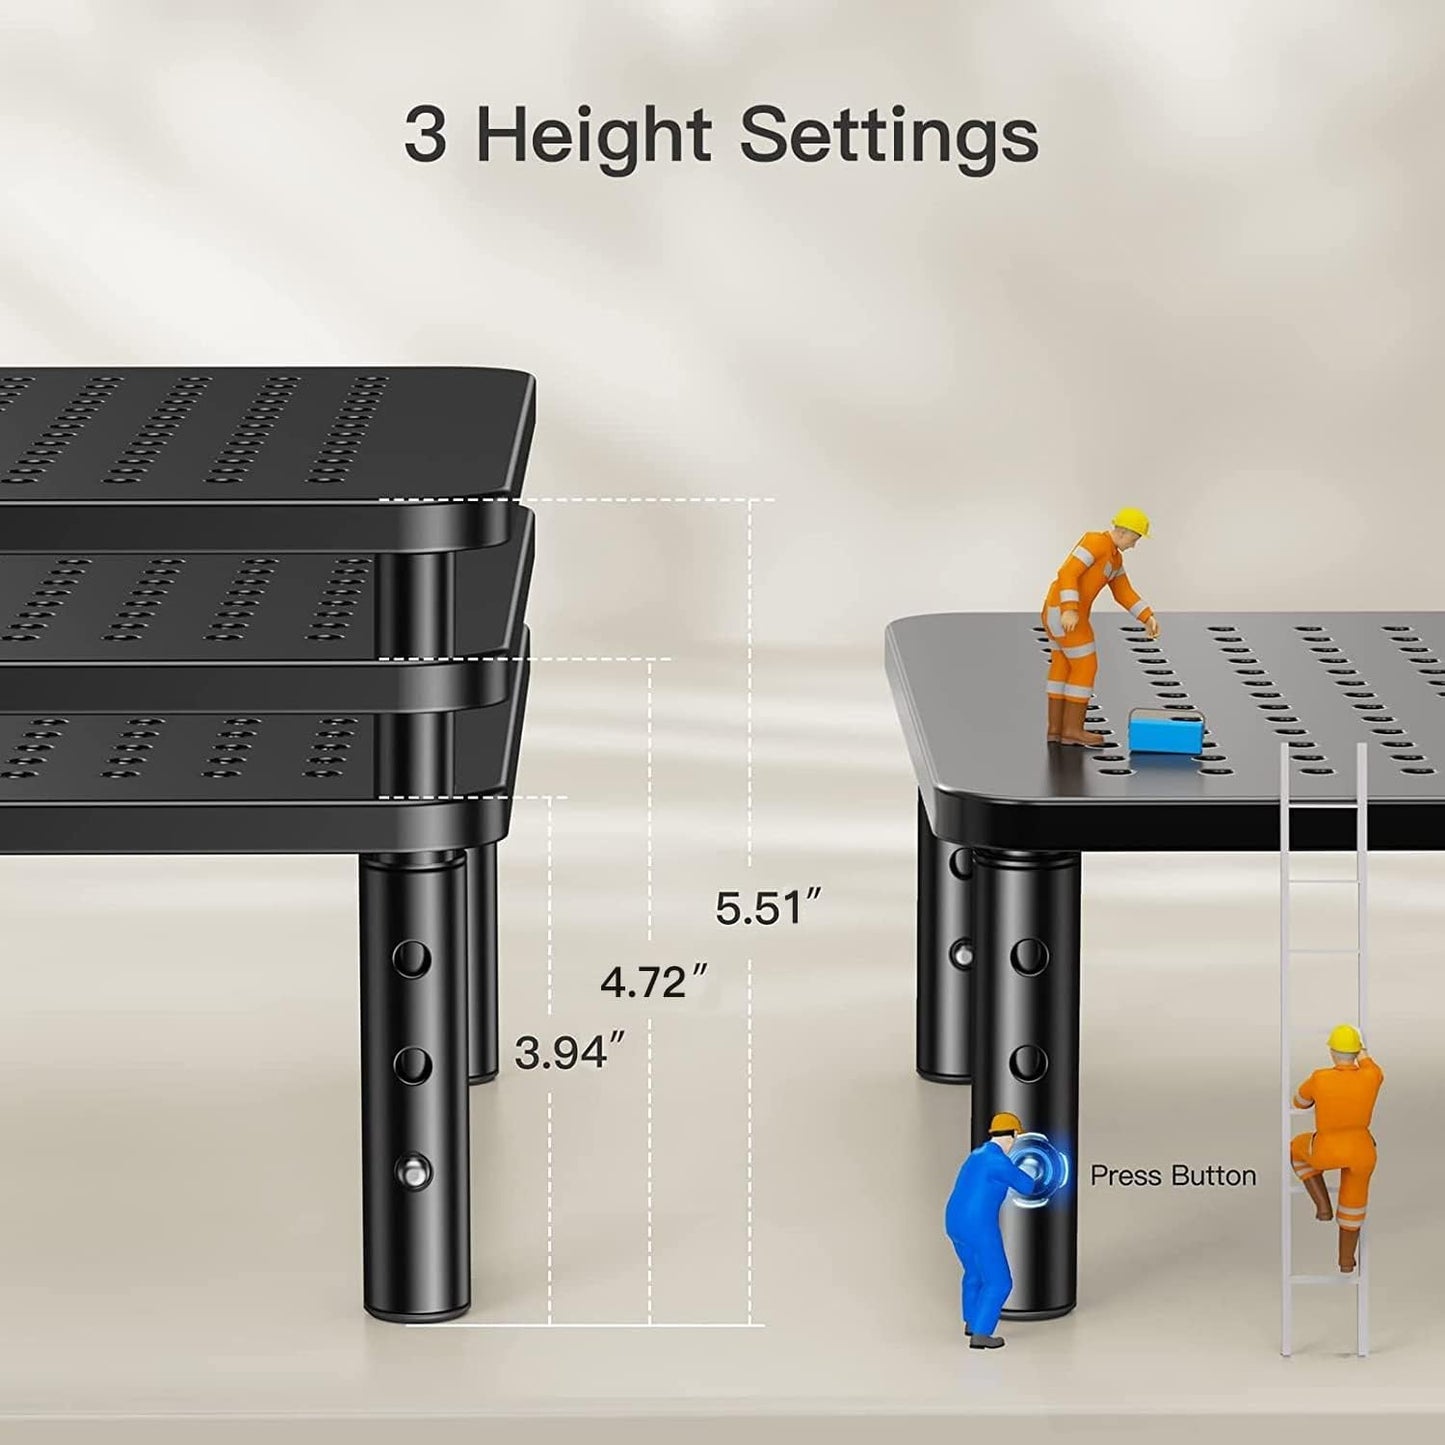 HUANUO Monitor Stand, Monitor Stand Riser 3 Height Adjustable, Monitor Riser with Airflow Vents